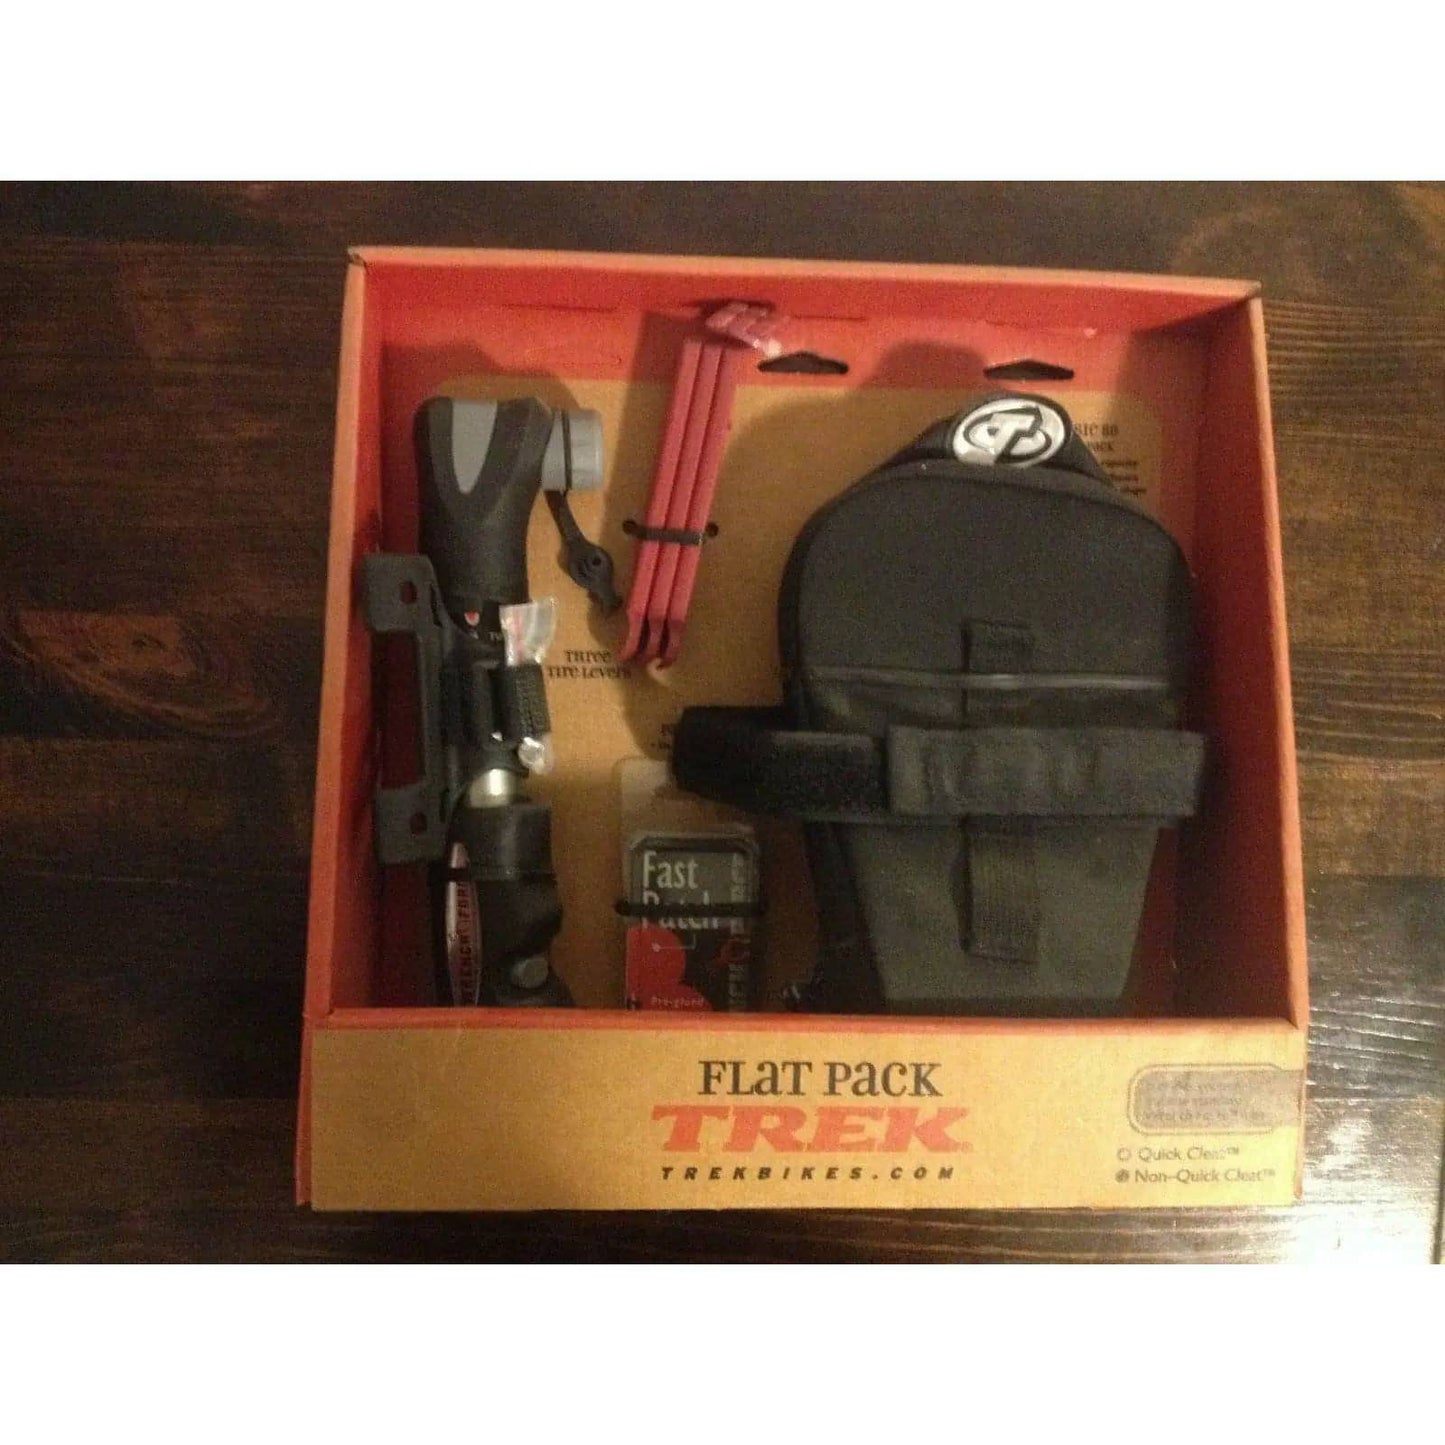 Trek Flat Pack #1 + #2 [Cycling Gear for Sale] BooksCardsNBikes